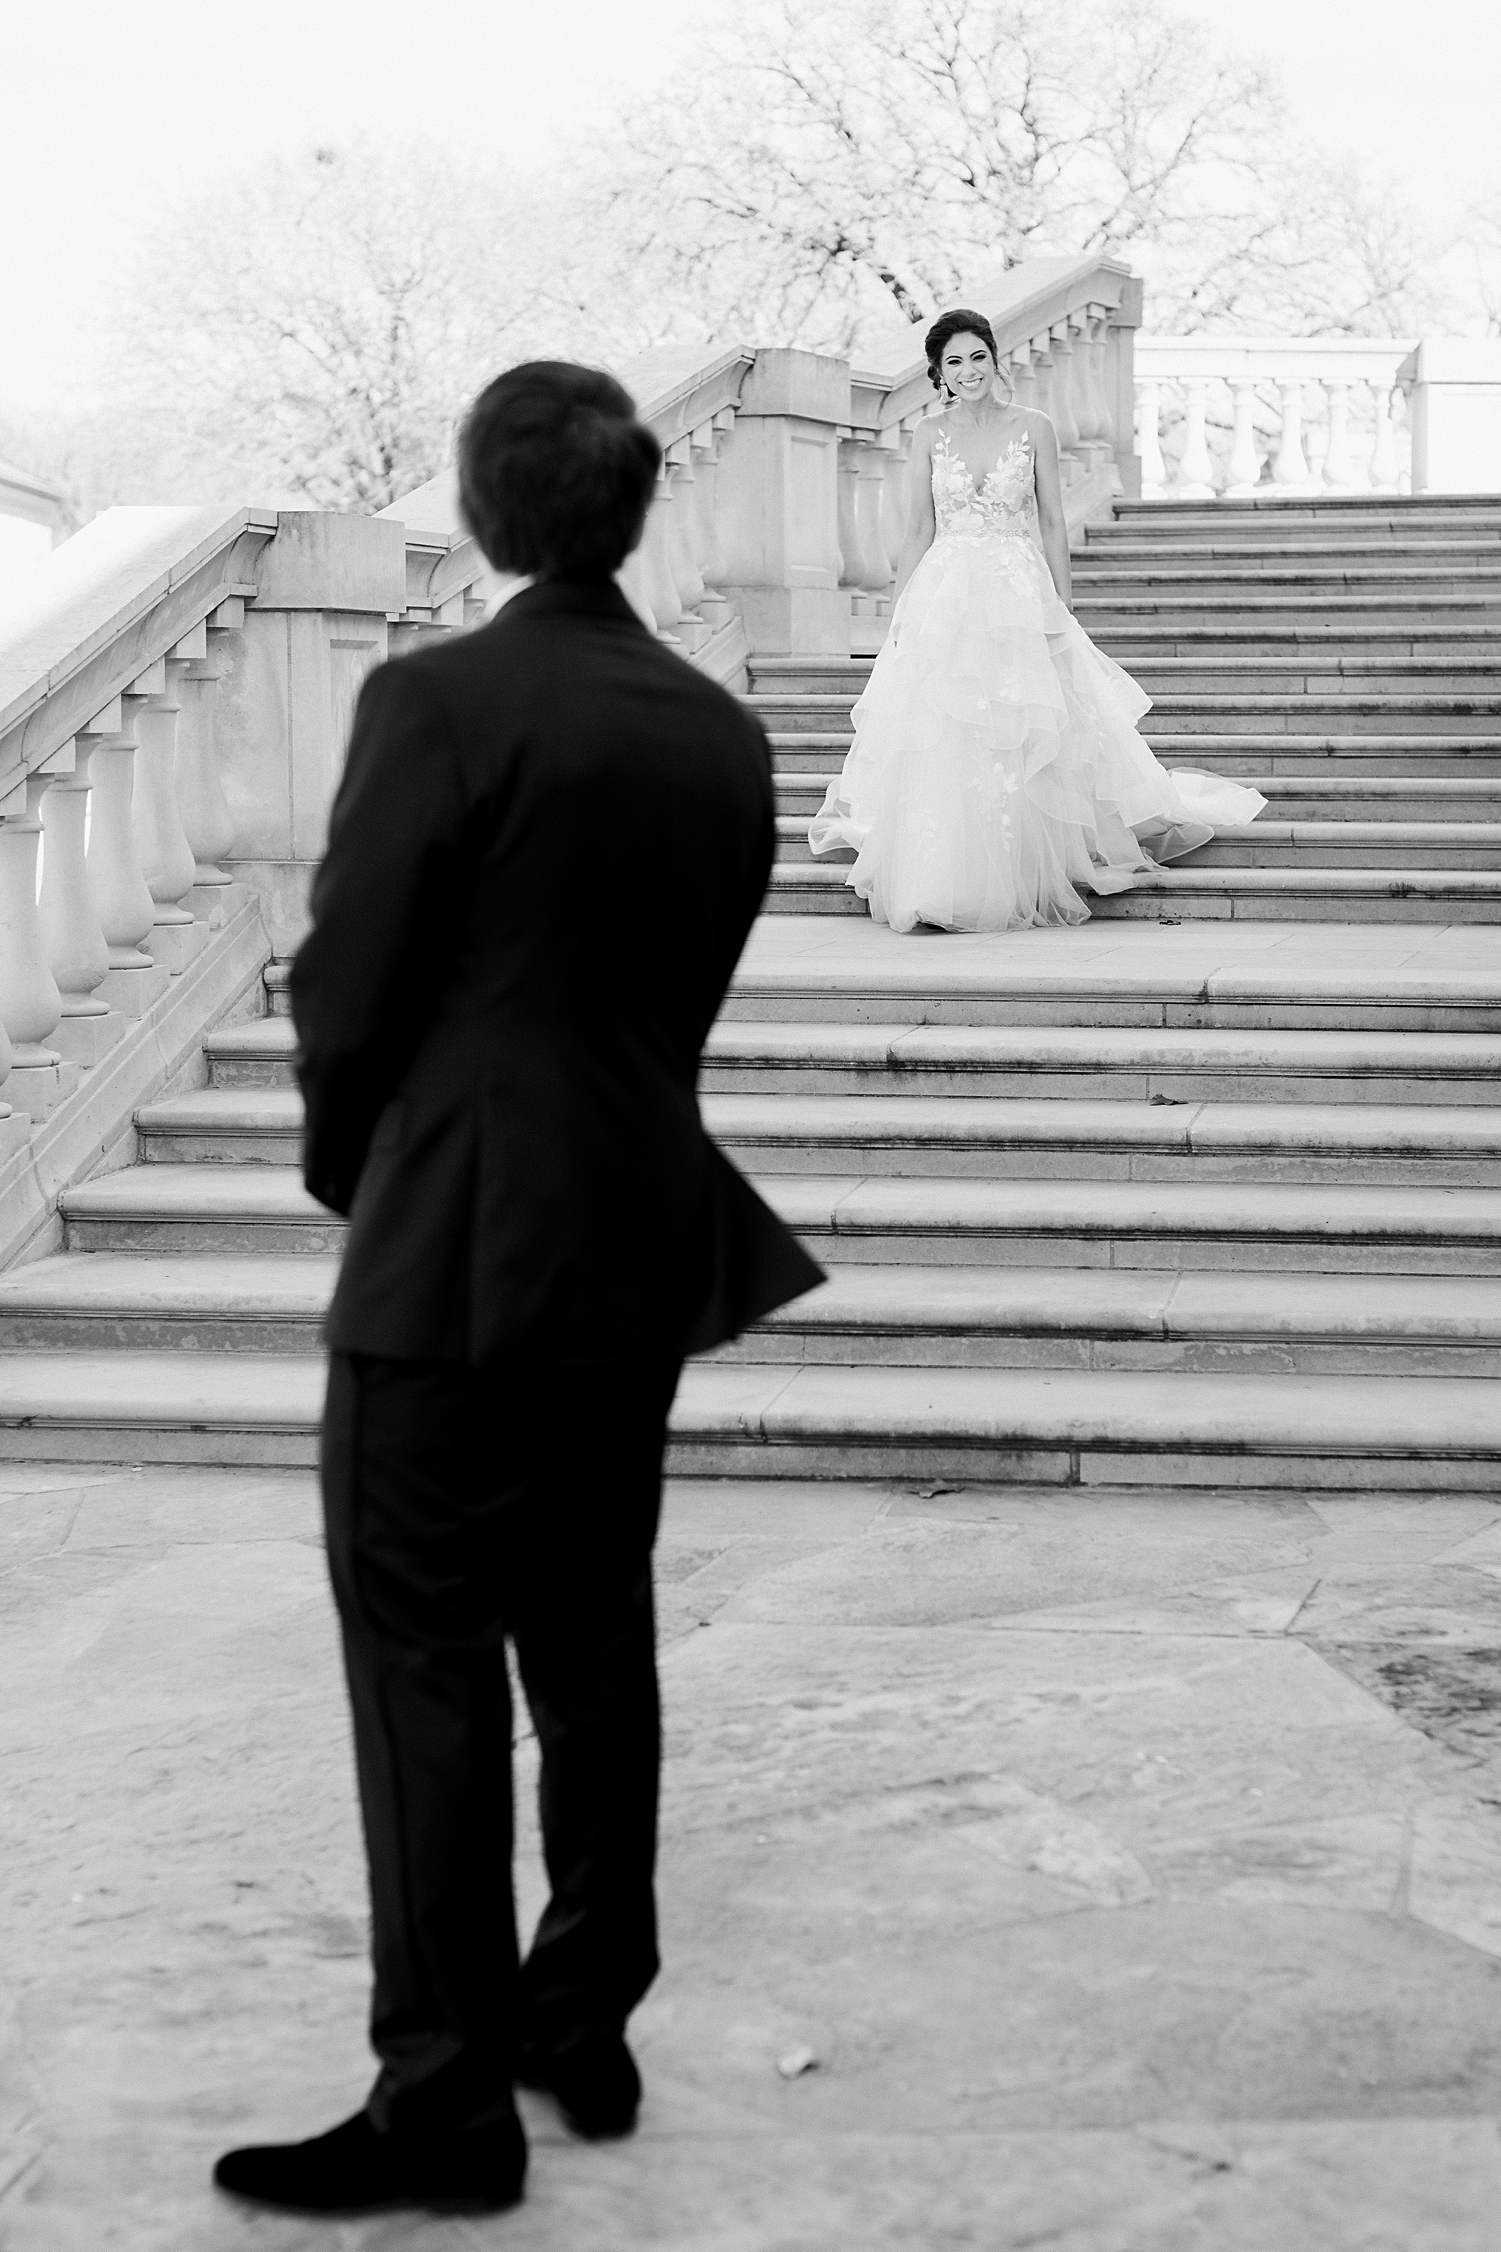 man in black tuxedo waiting for bride in white gown to come down concrete stairs on french estate wedding day black and white